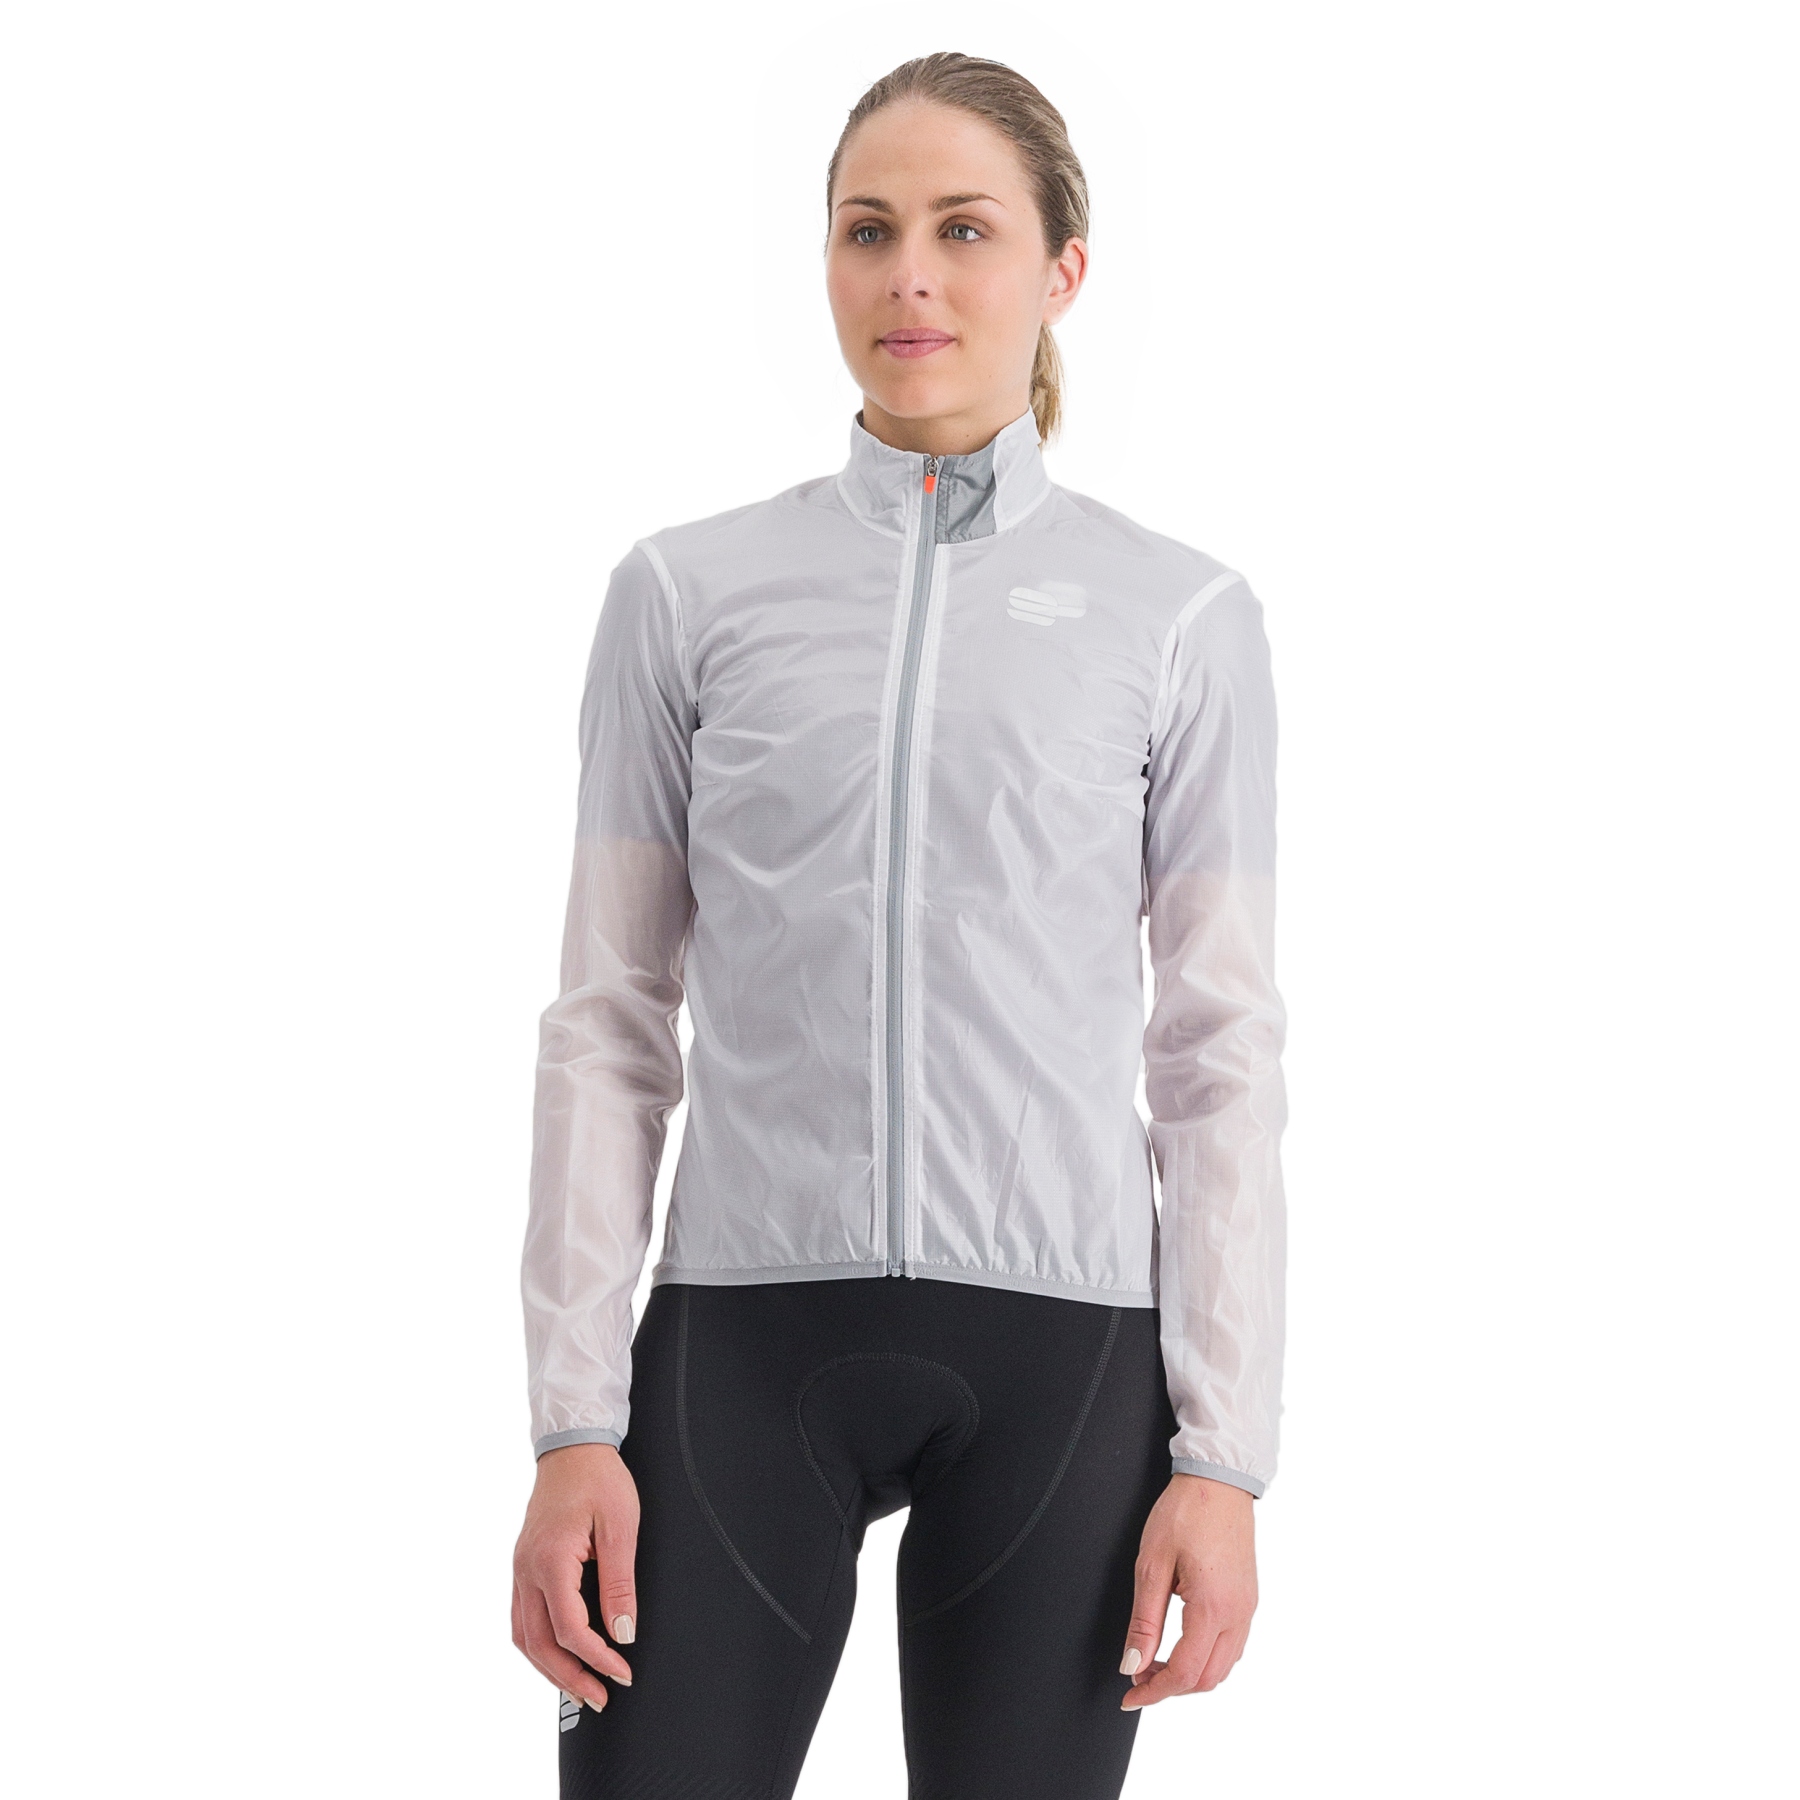 Picture of Sportful Hot Pack Easylight Women Jacket - 101 White